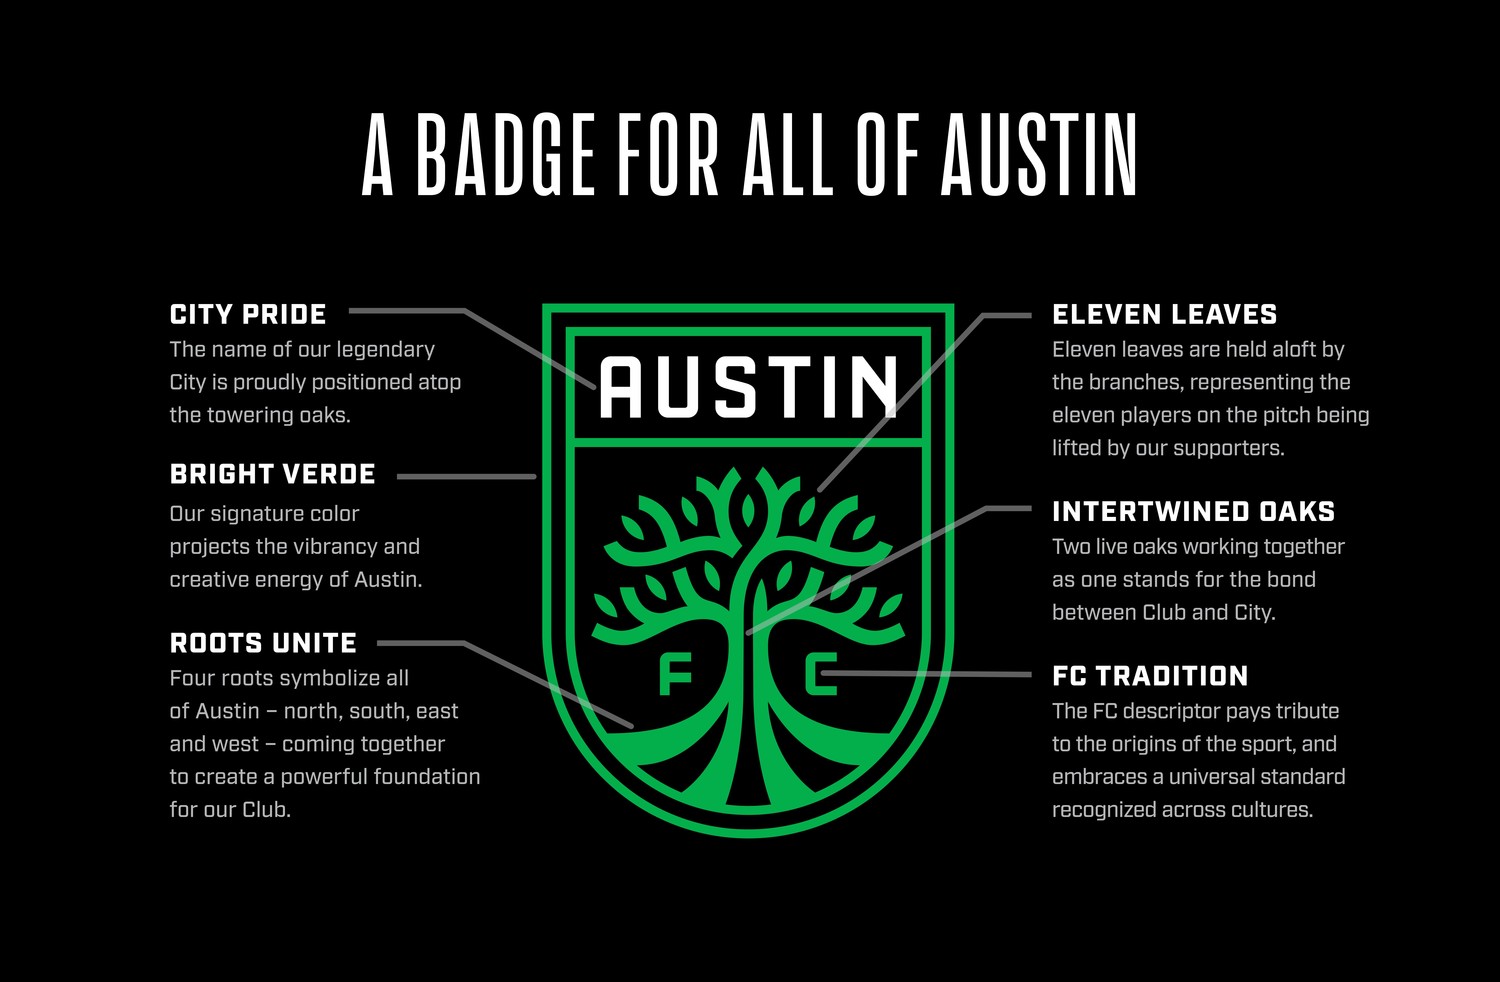 Austin MLS team reveals colors, logo and name | Hill ...